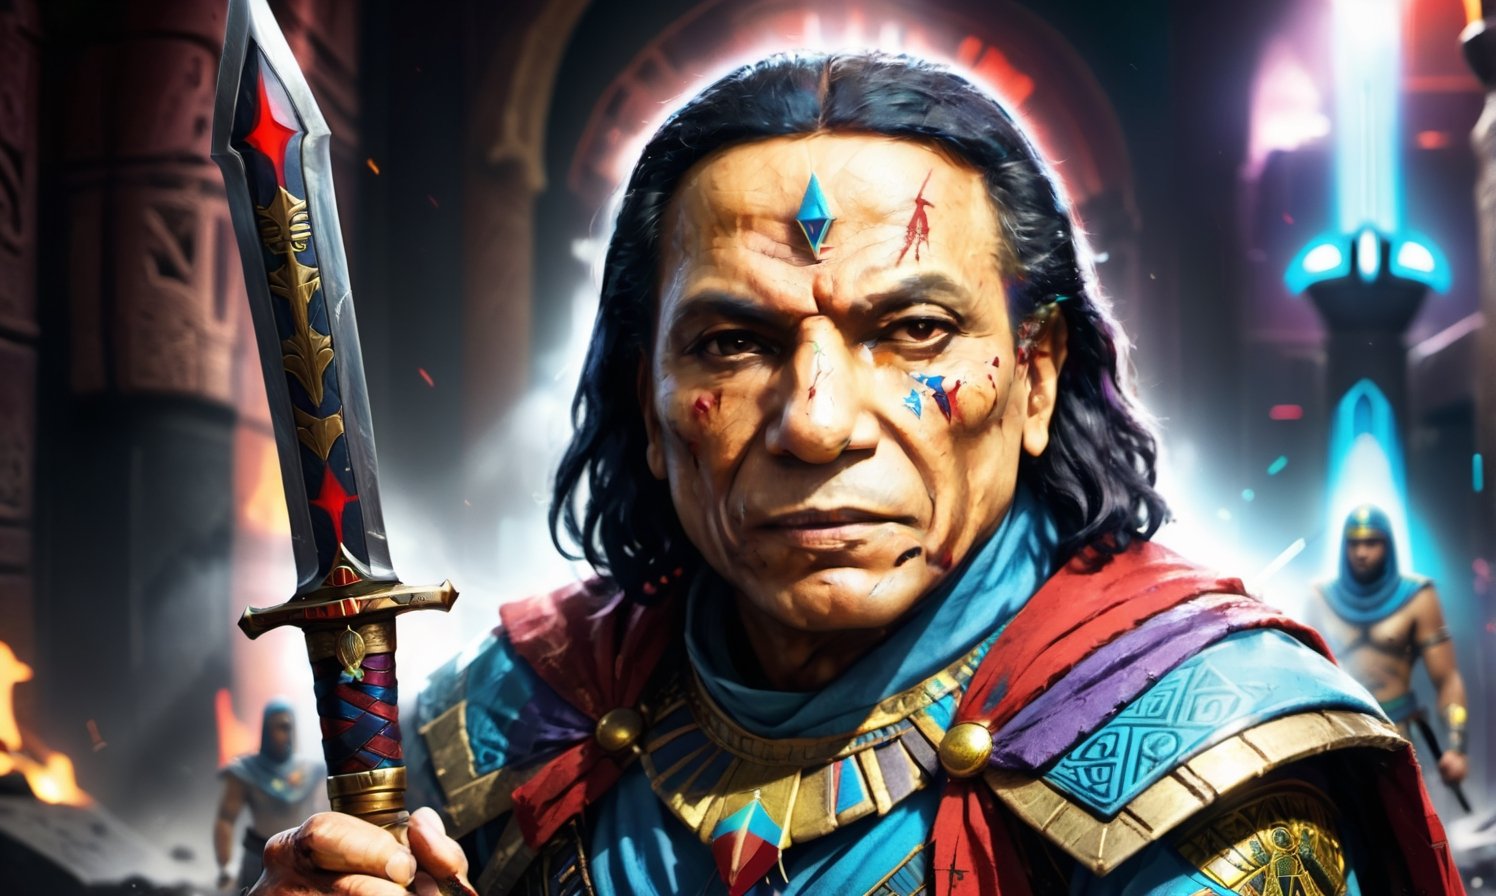 Egyptian warrior phoroh king, evil look, wearing ancinet egyptian clothes, blood on face, wounds in face, adel emam with sword in his hand, High detailed, Color magic,cyberpunk style,adel emam,LegendDarkFantasy,photo r3al,colorful,color art,color chaos